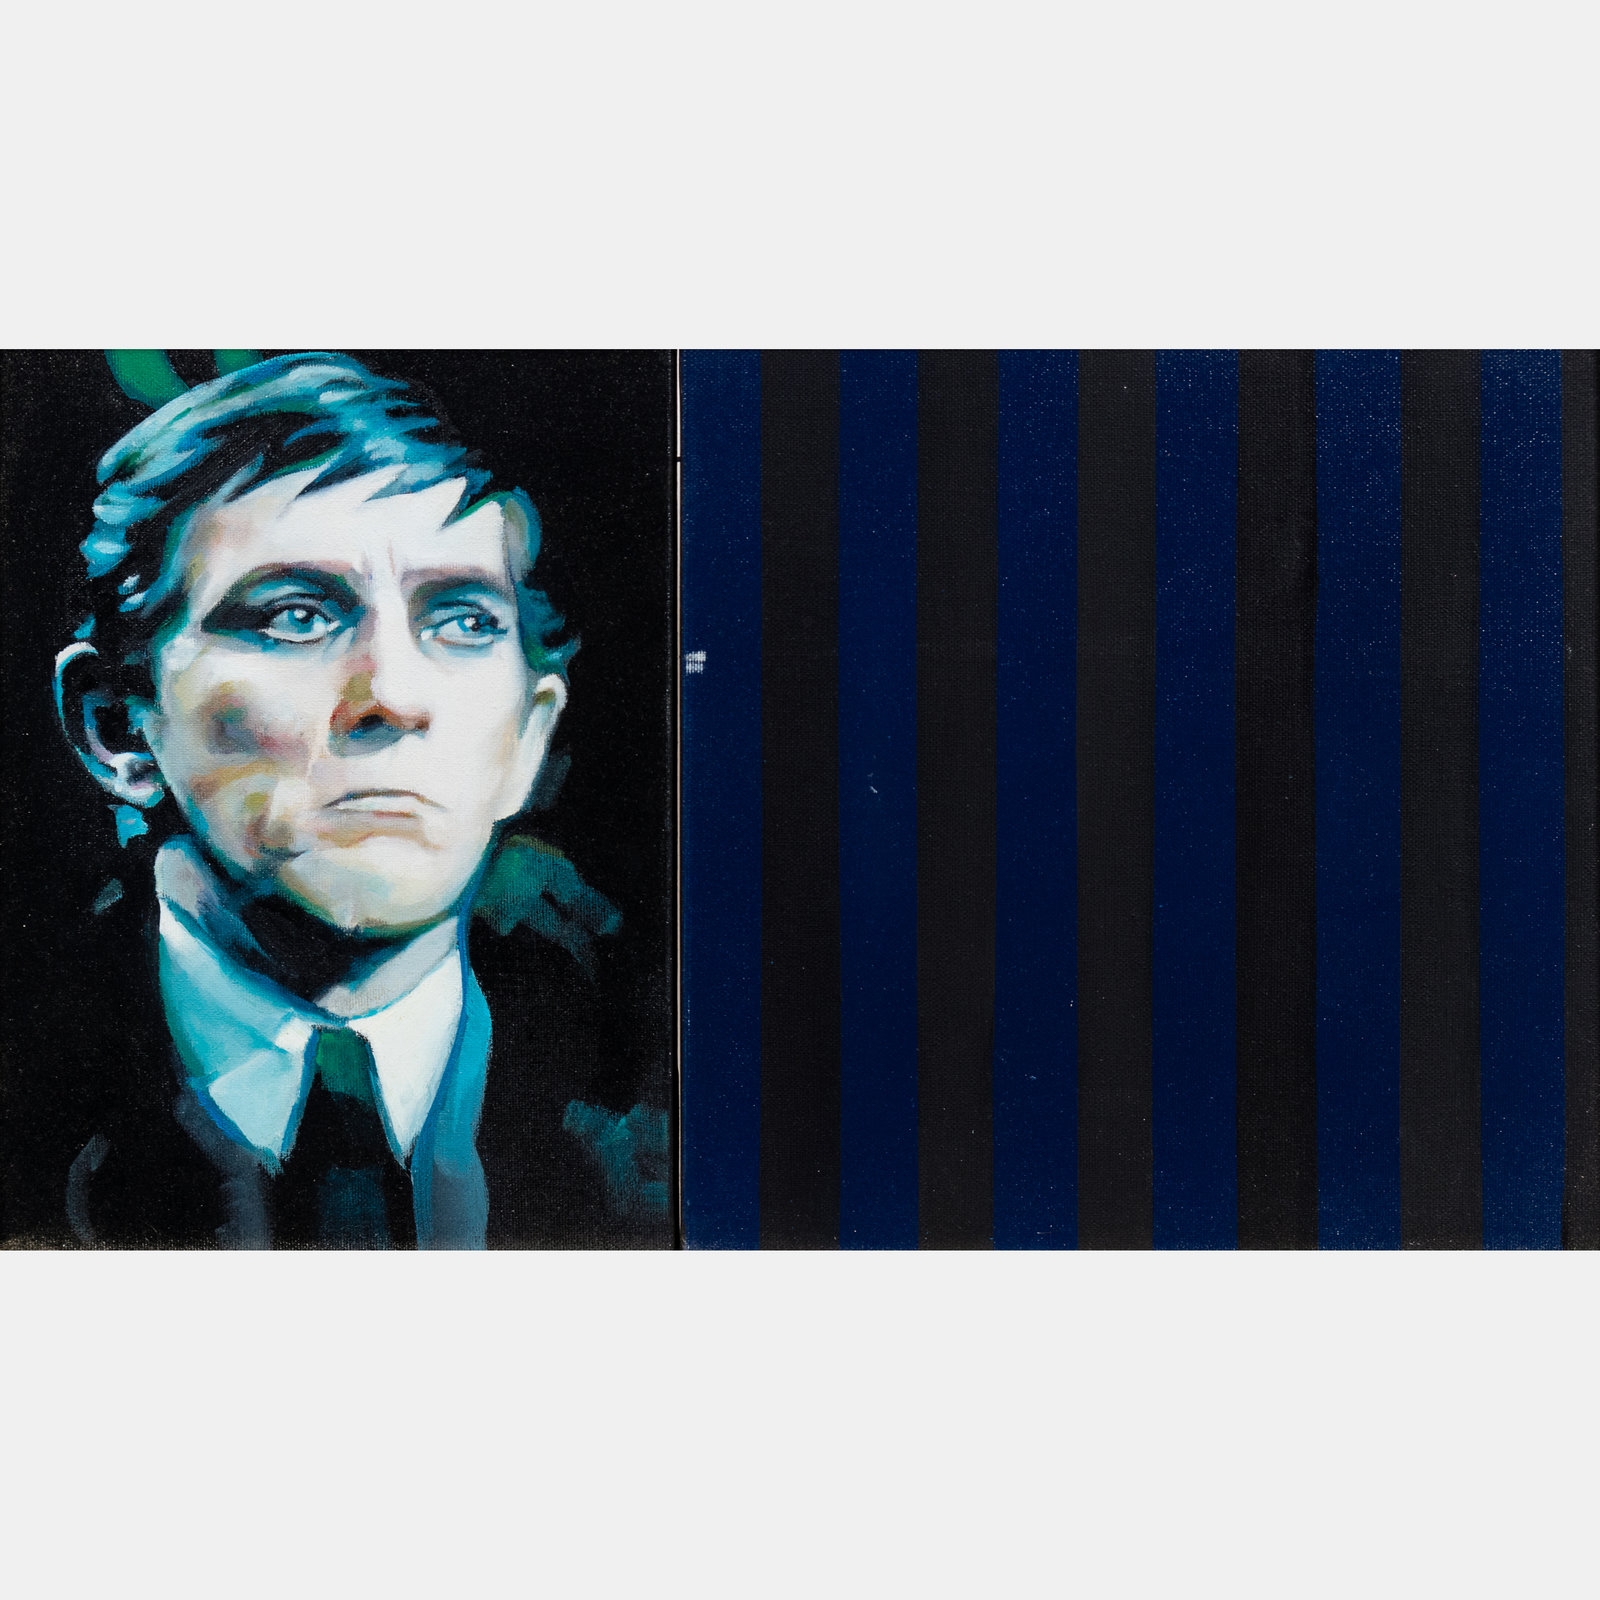 Artwork by Jeremy Blake, Blues Before Sunrise (diptych), Made of oil on canvas